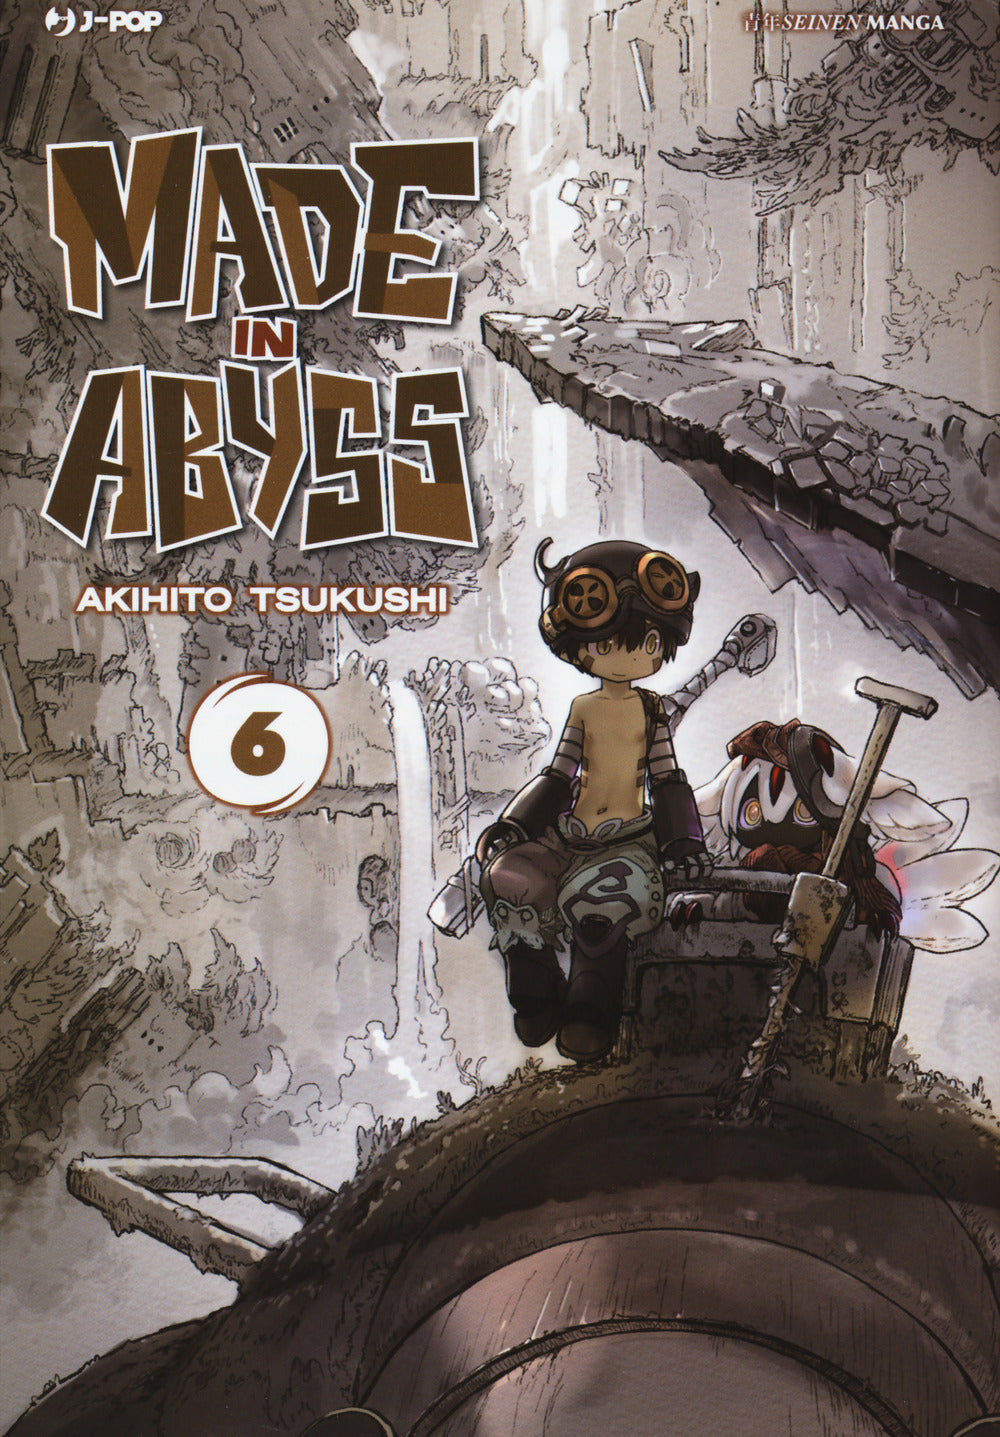 Made in abyss. Vol. 6.